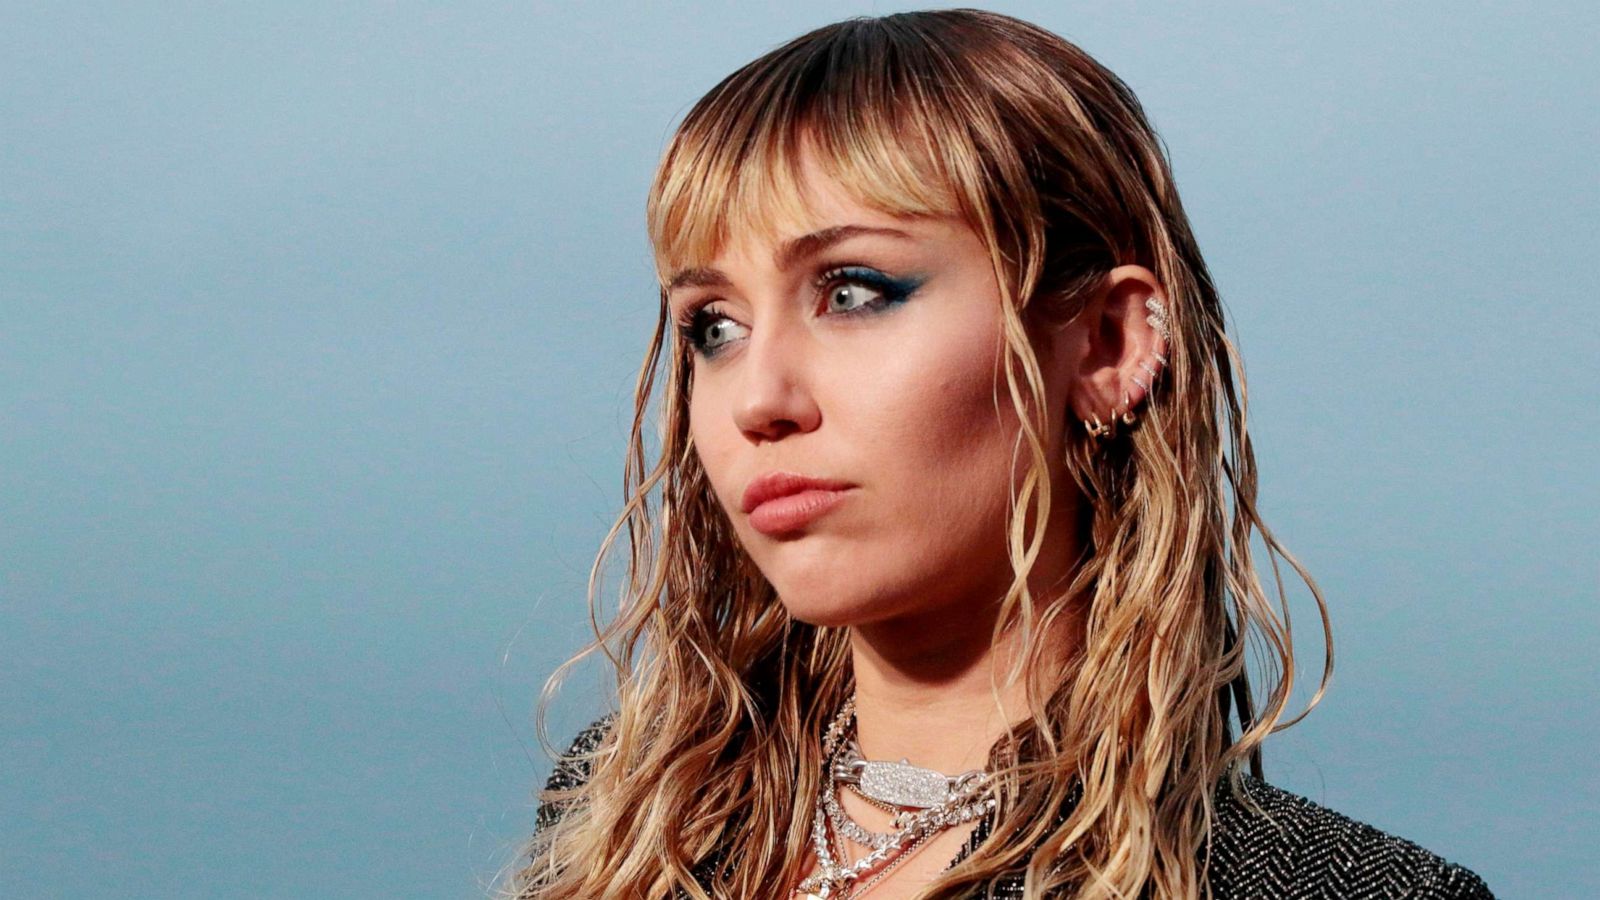 Miley Cyrus Is the 'Happiest She's Been in a Long Time': Source